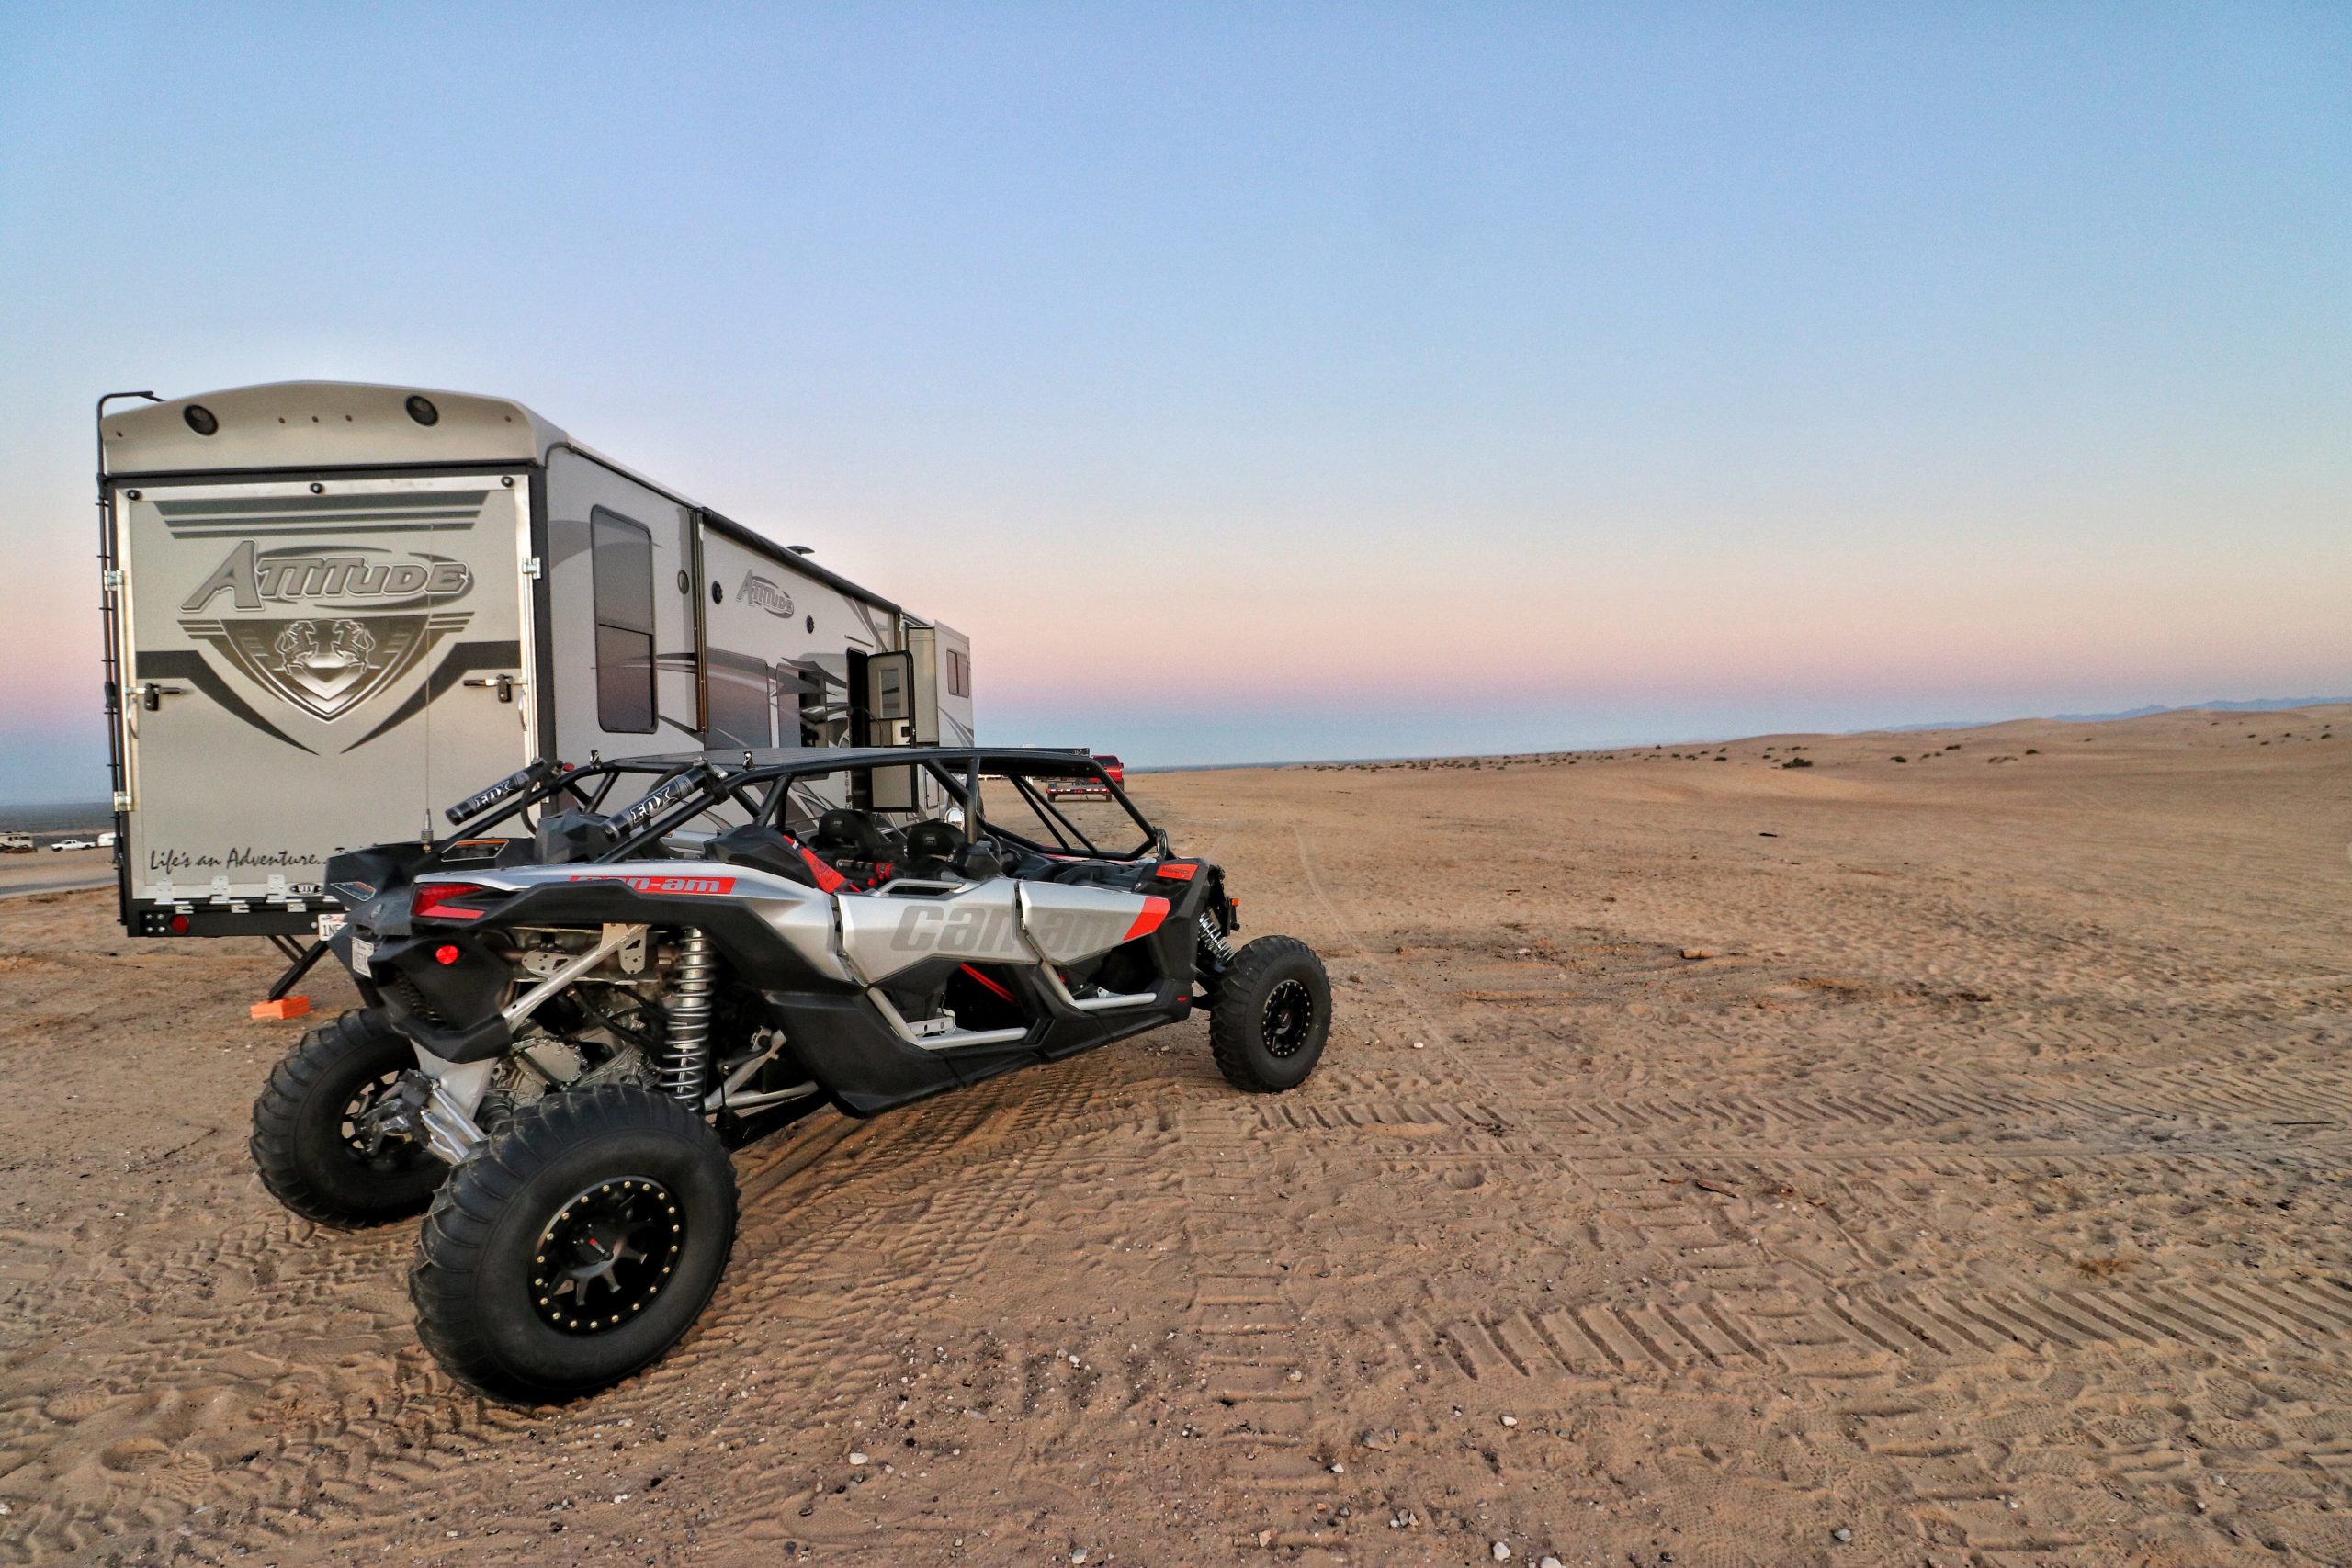 Glamis Sand Dunes Events 2022 - Astronomical Events 2022